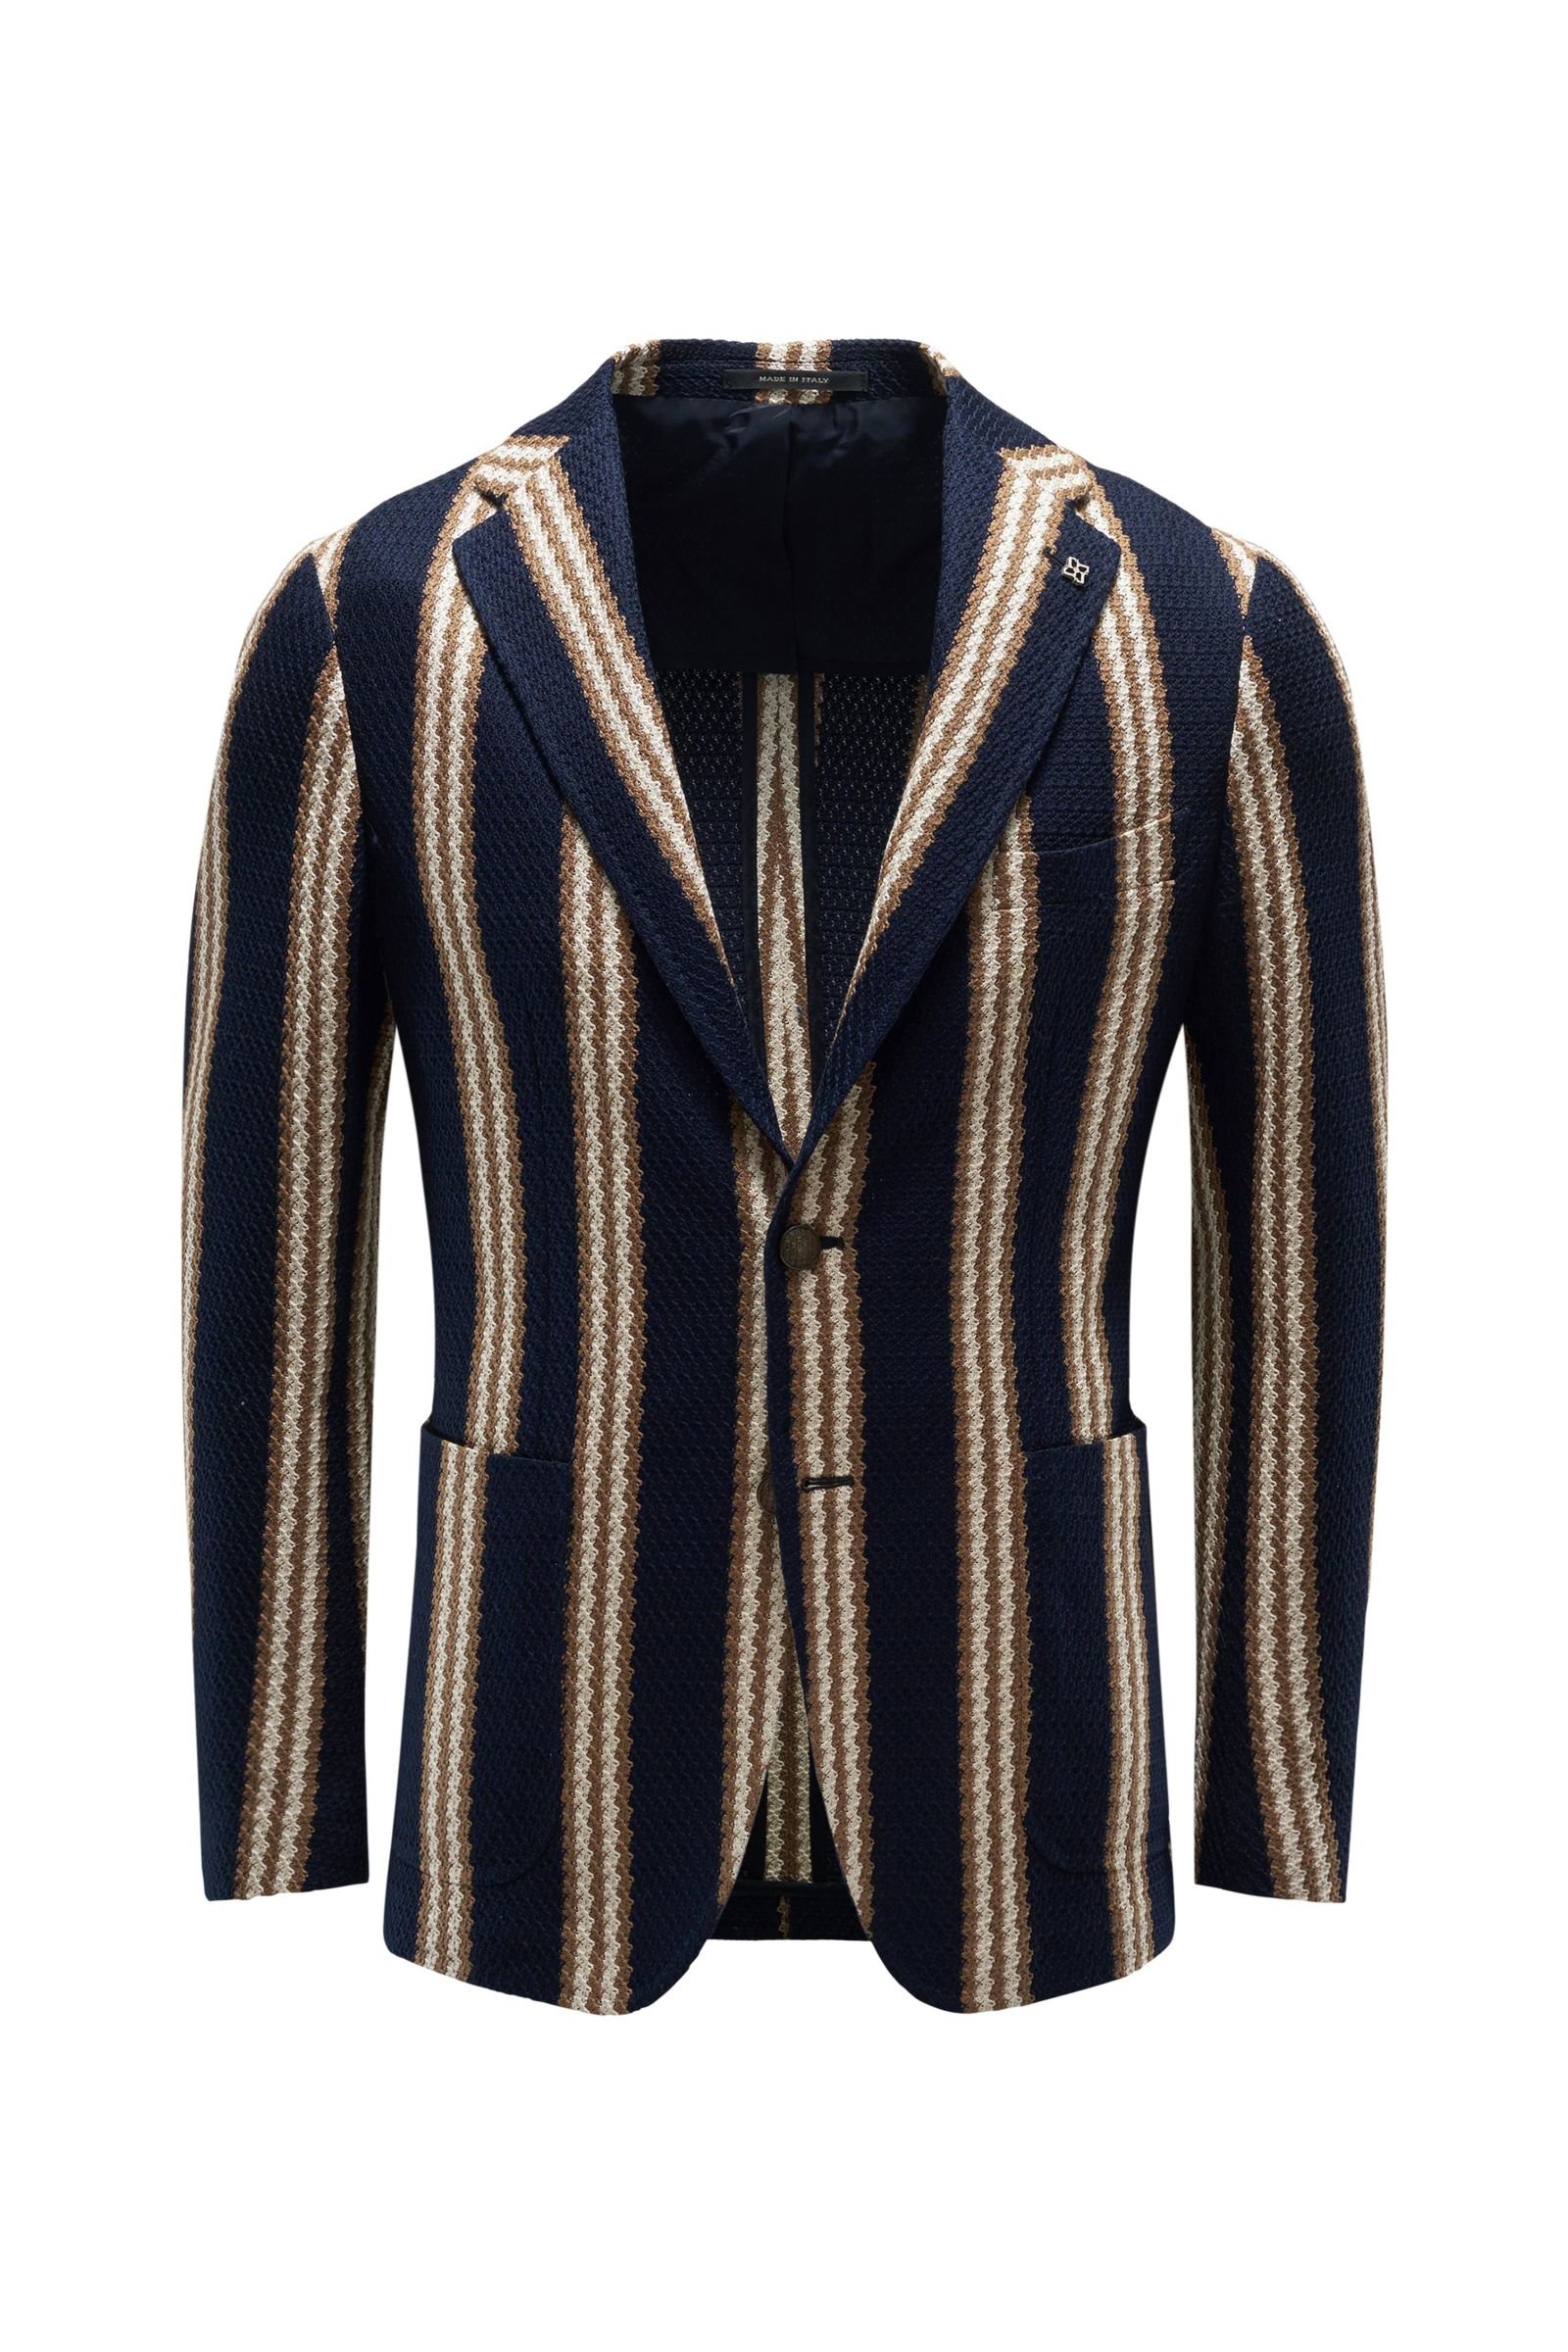 Smart-casual jacket navy/light brown striped